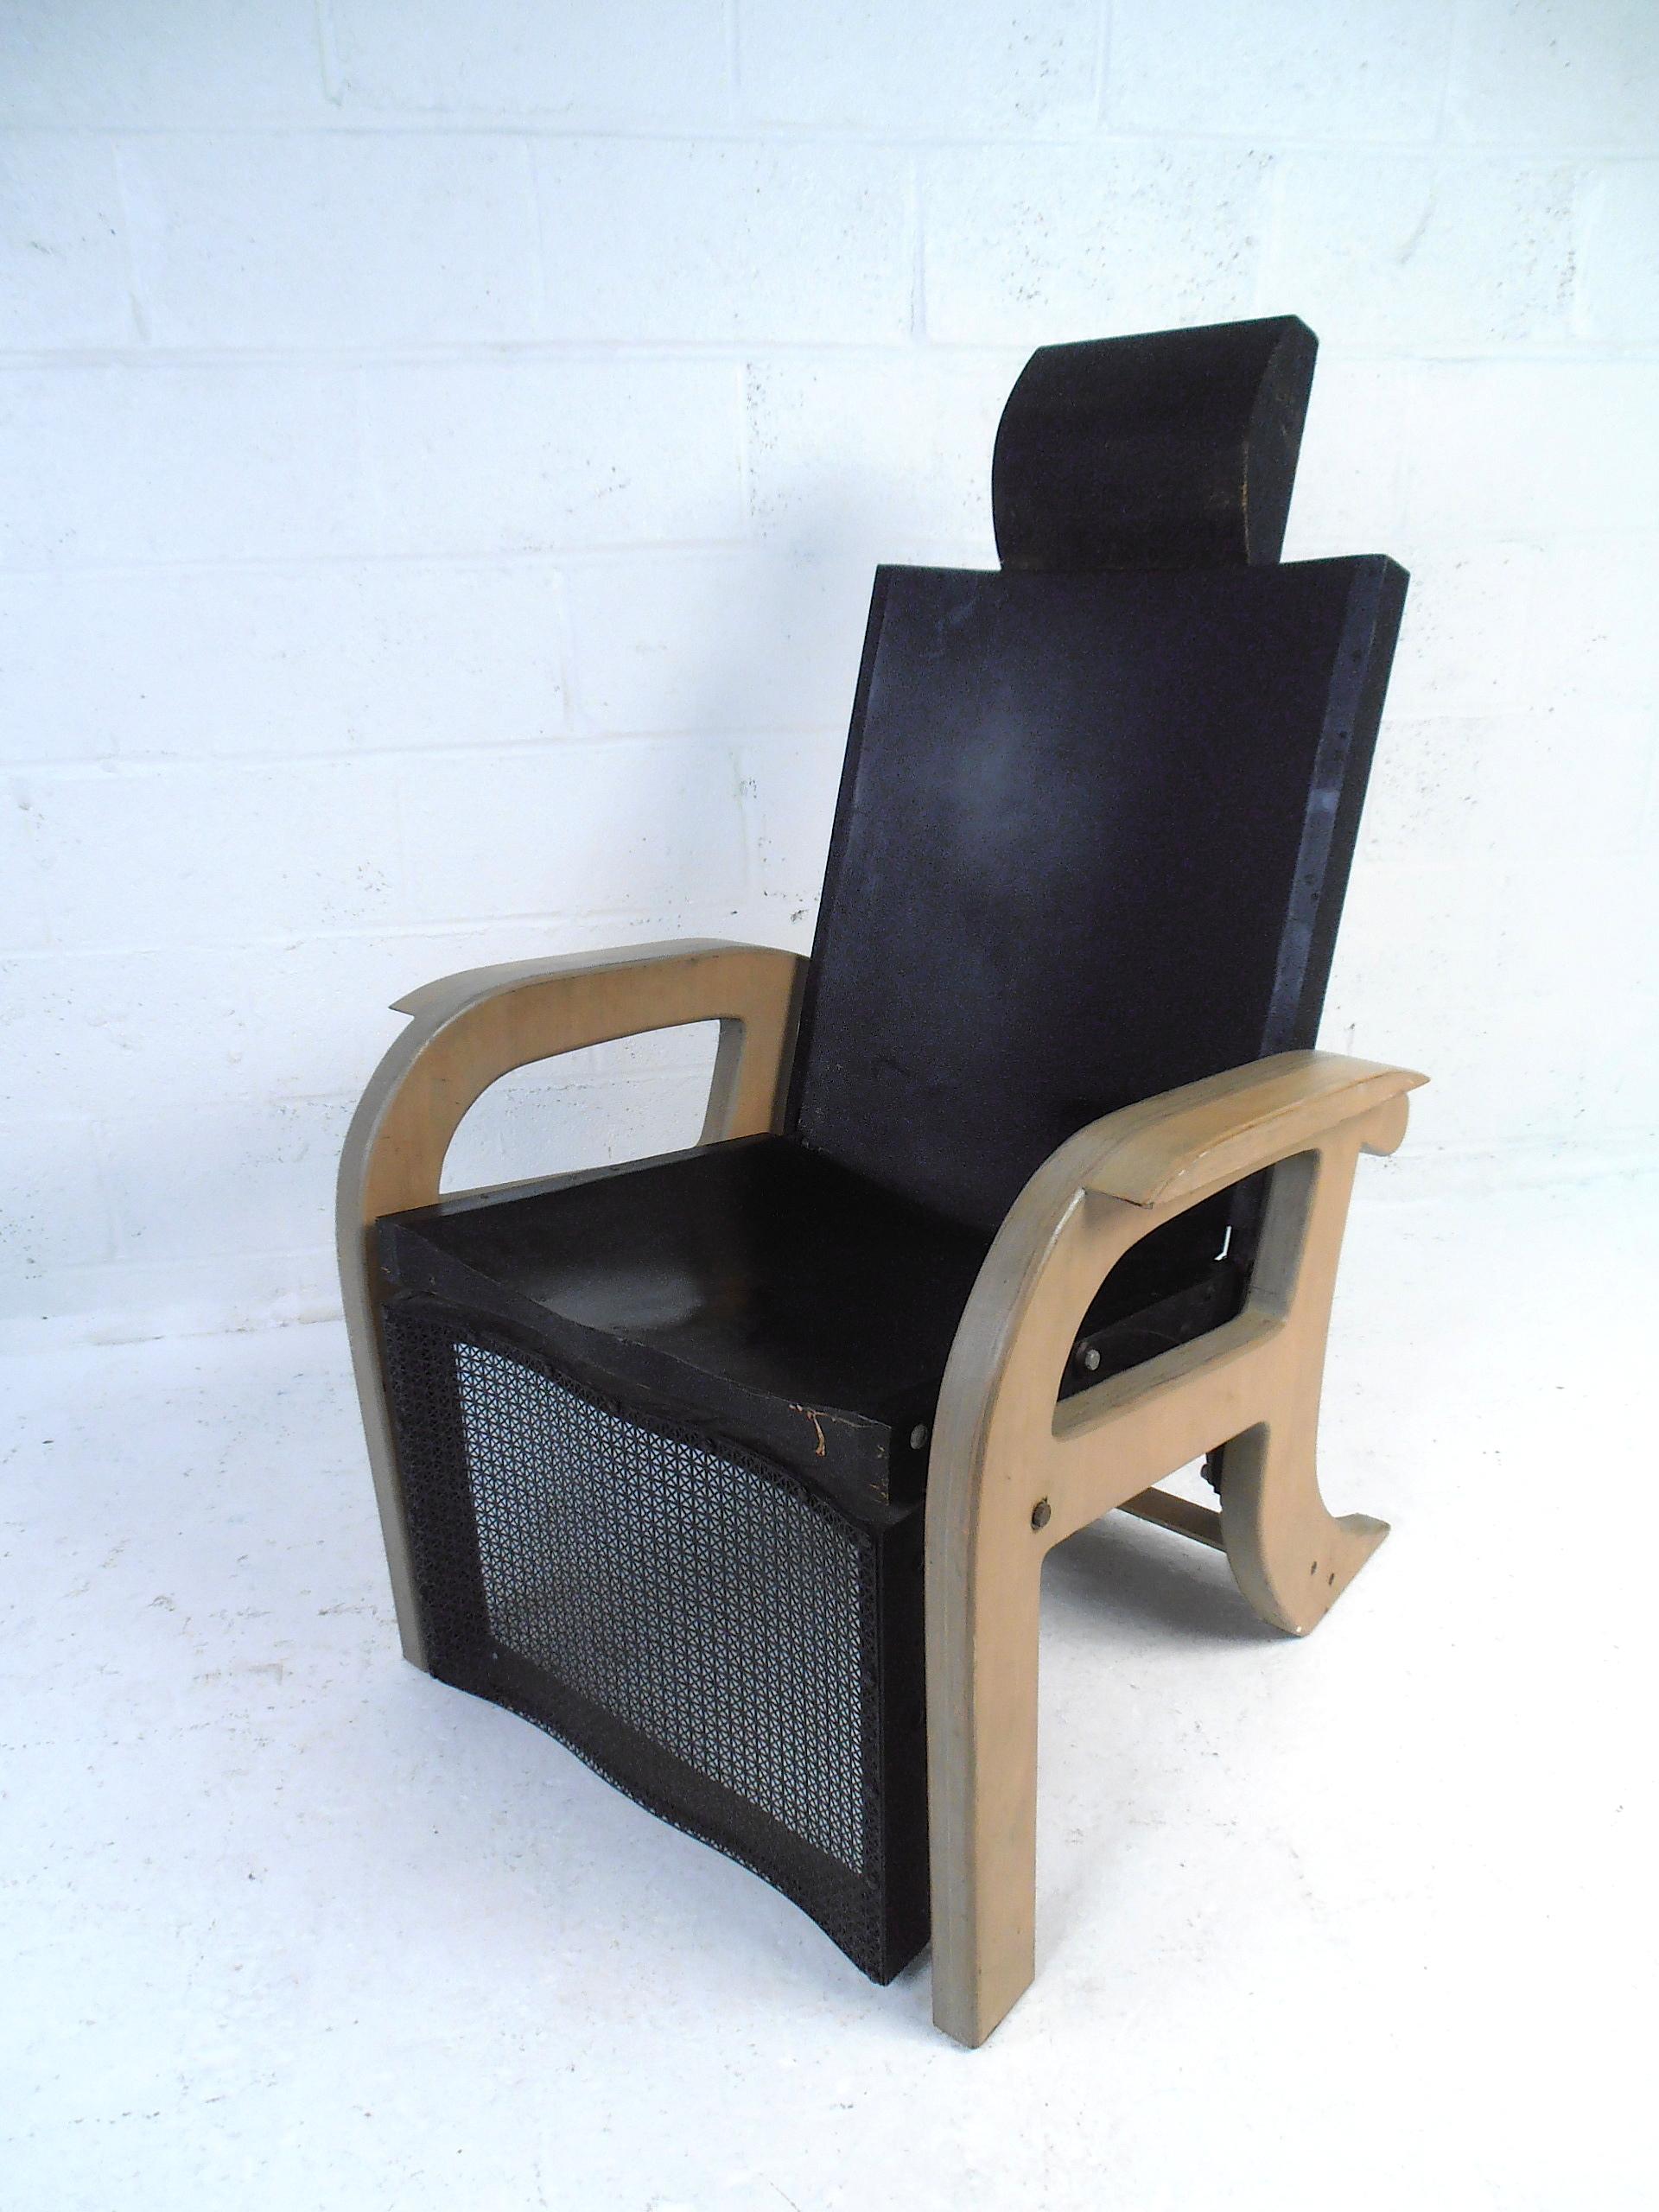 This midcentury reclining chair features classicly clean lines with modern comfort. Made from classic materials with sturdy construction this piece will add a flare to any space it is in, without overpowering the space. Great for a TV room or home